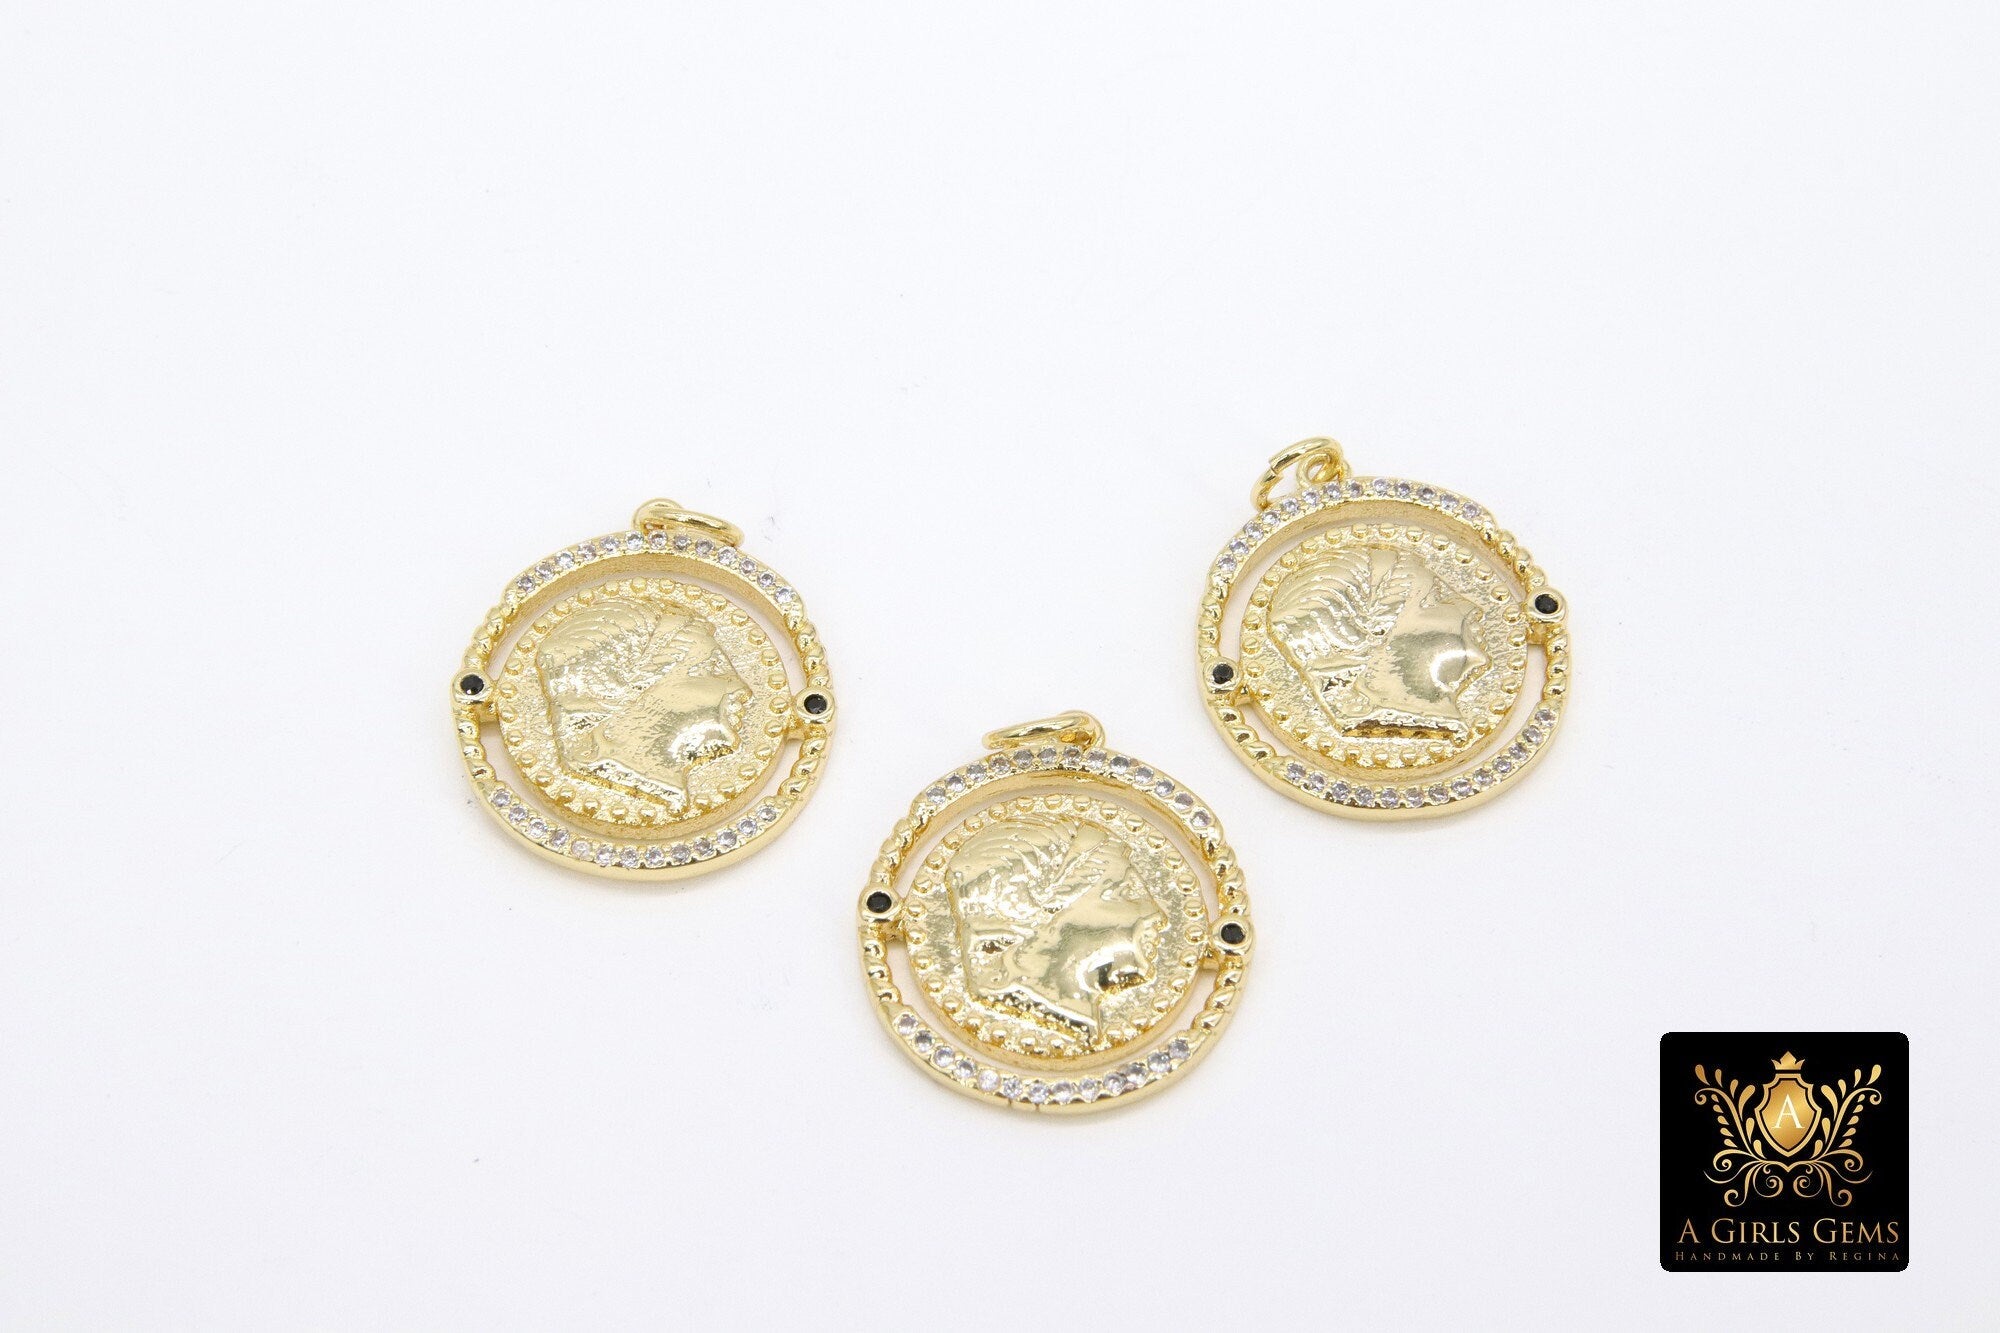 Gold Coin Charm, 4 Styles CZ Pave Round Disc Charms #2655, Athena Owl